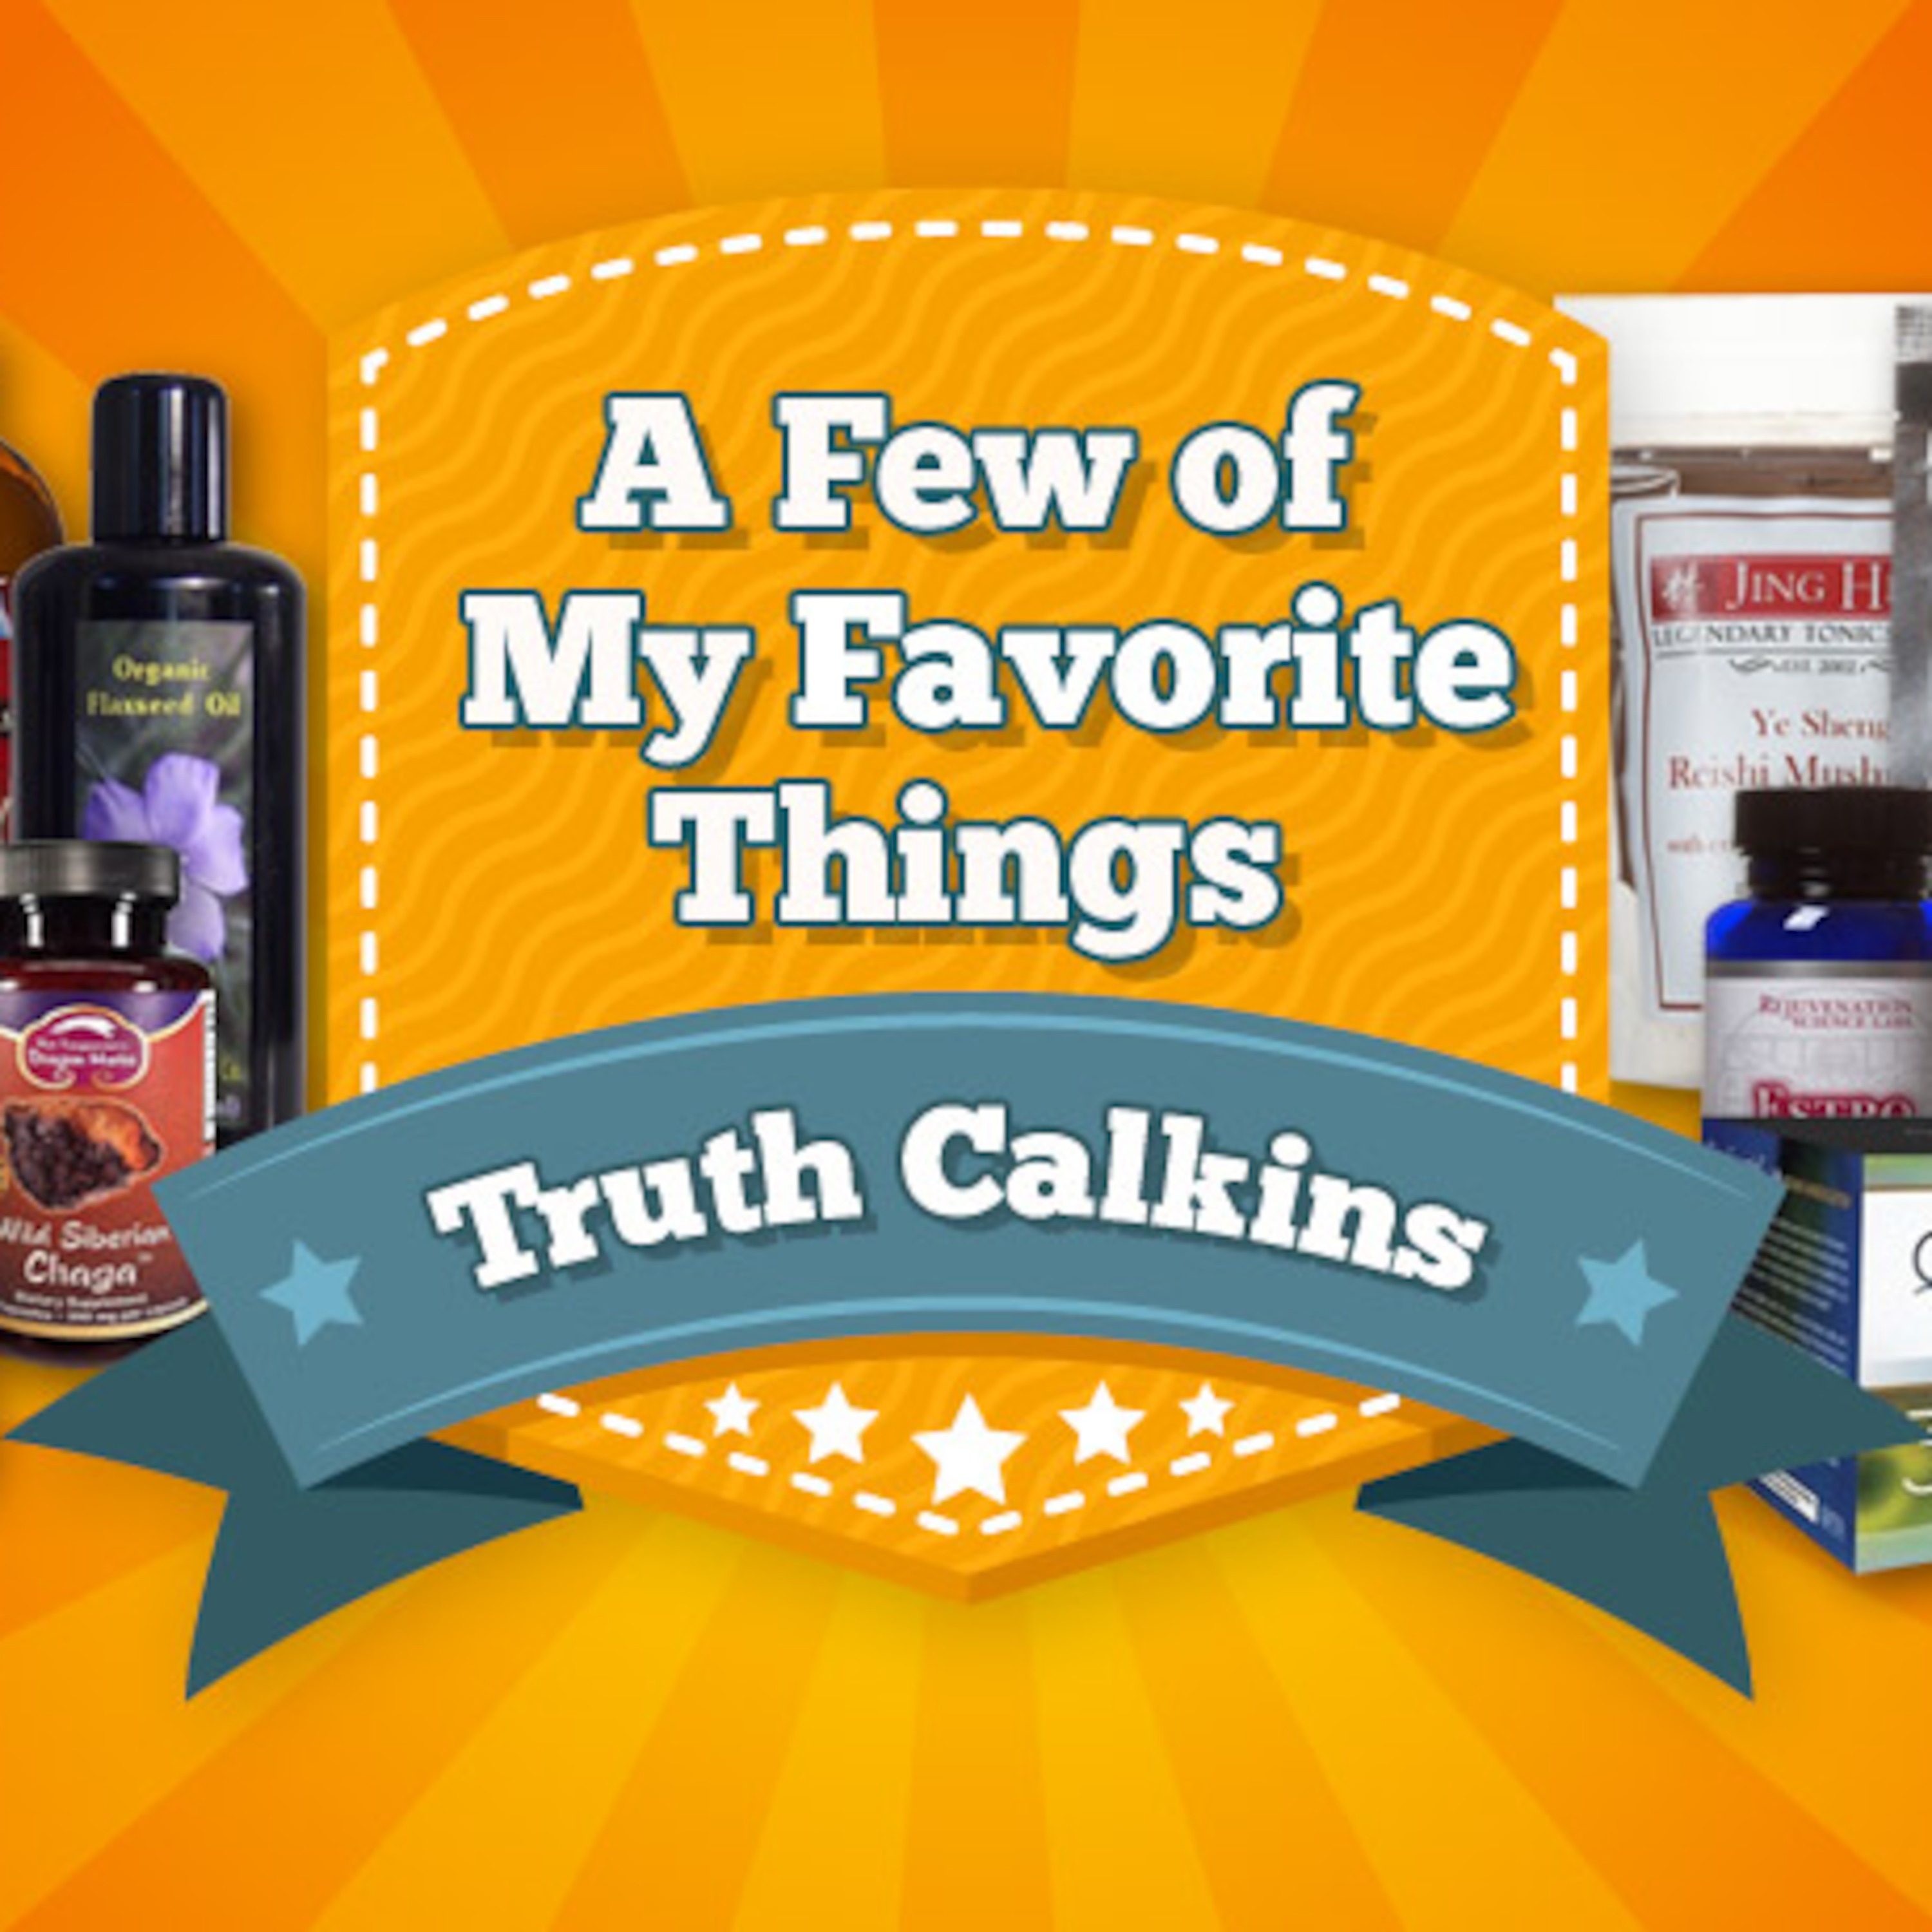 A Few Of My Favorite Things With Truth Calkins Lifes Longevitys